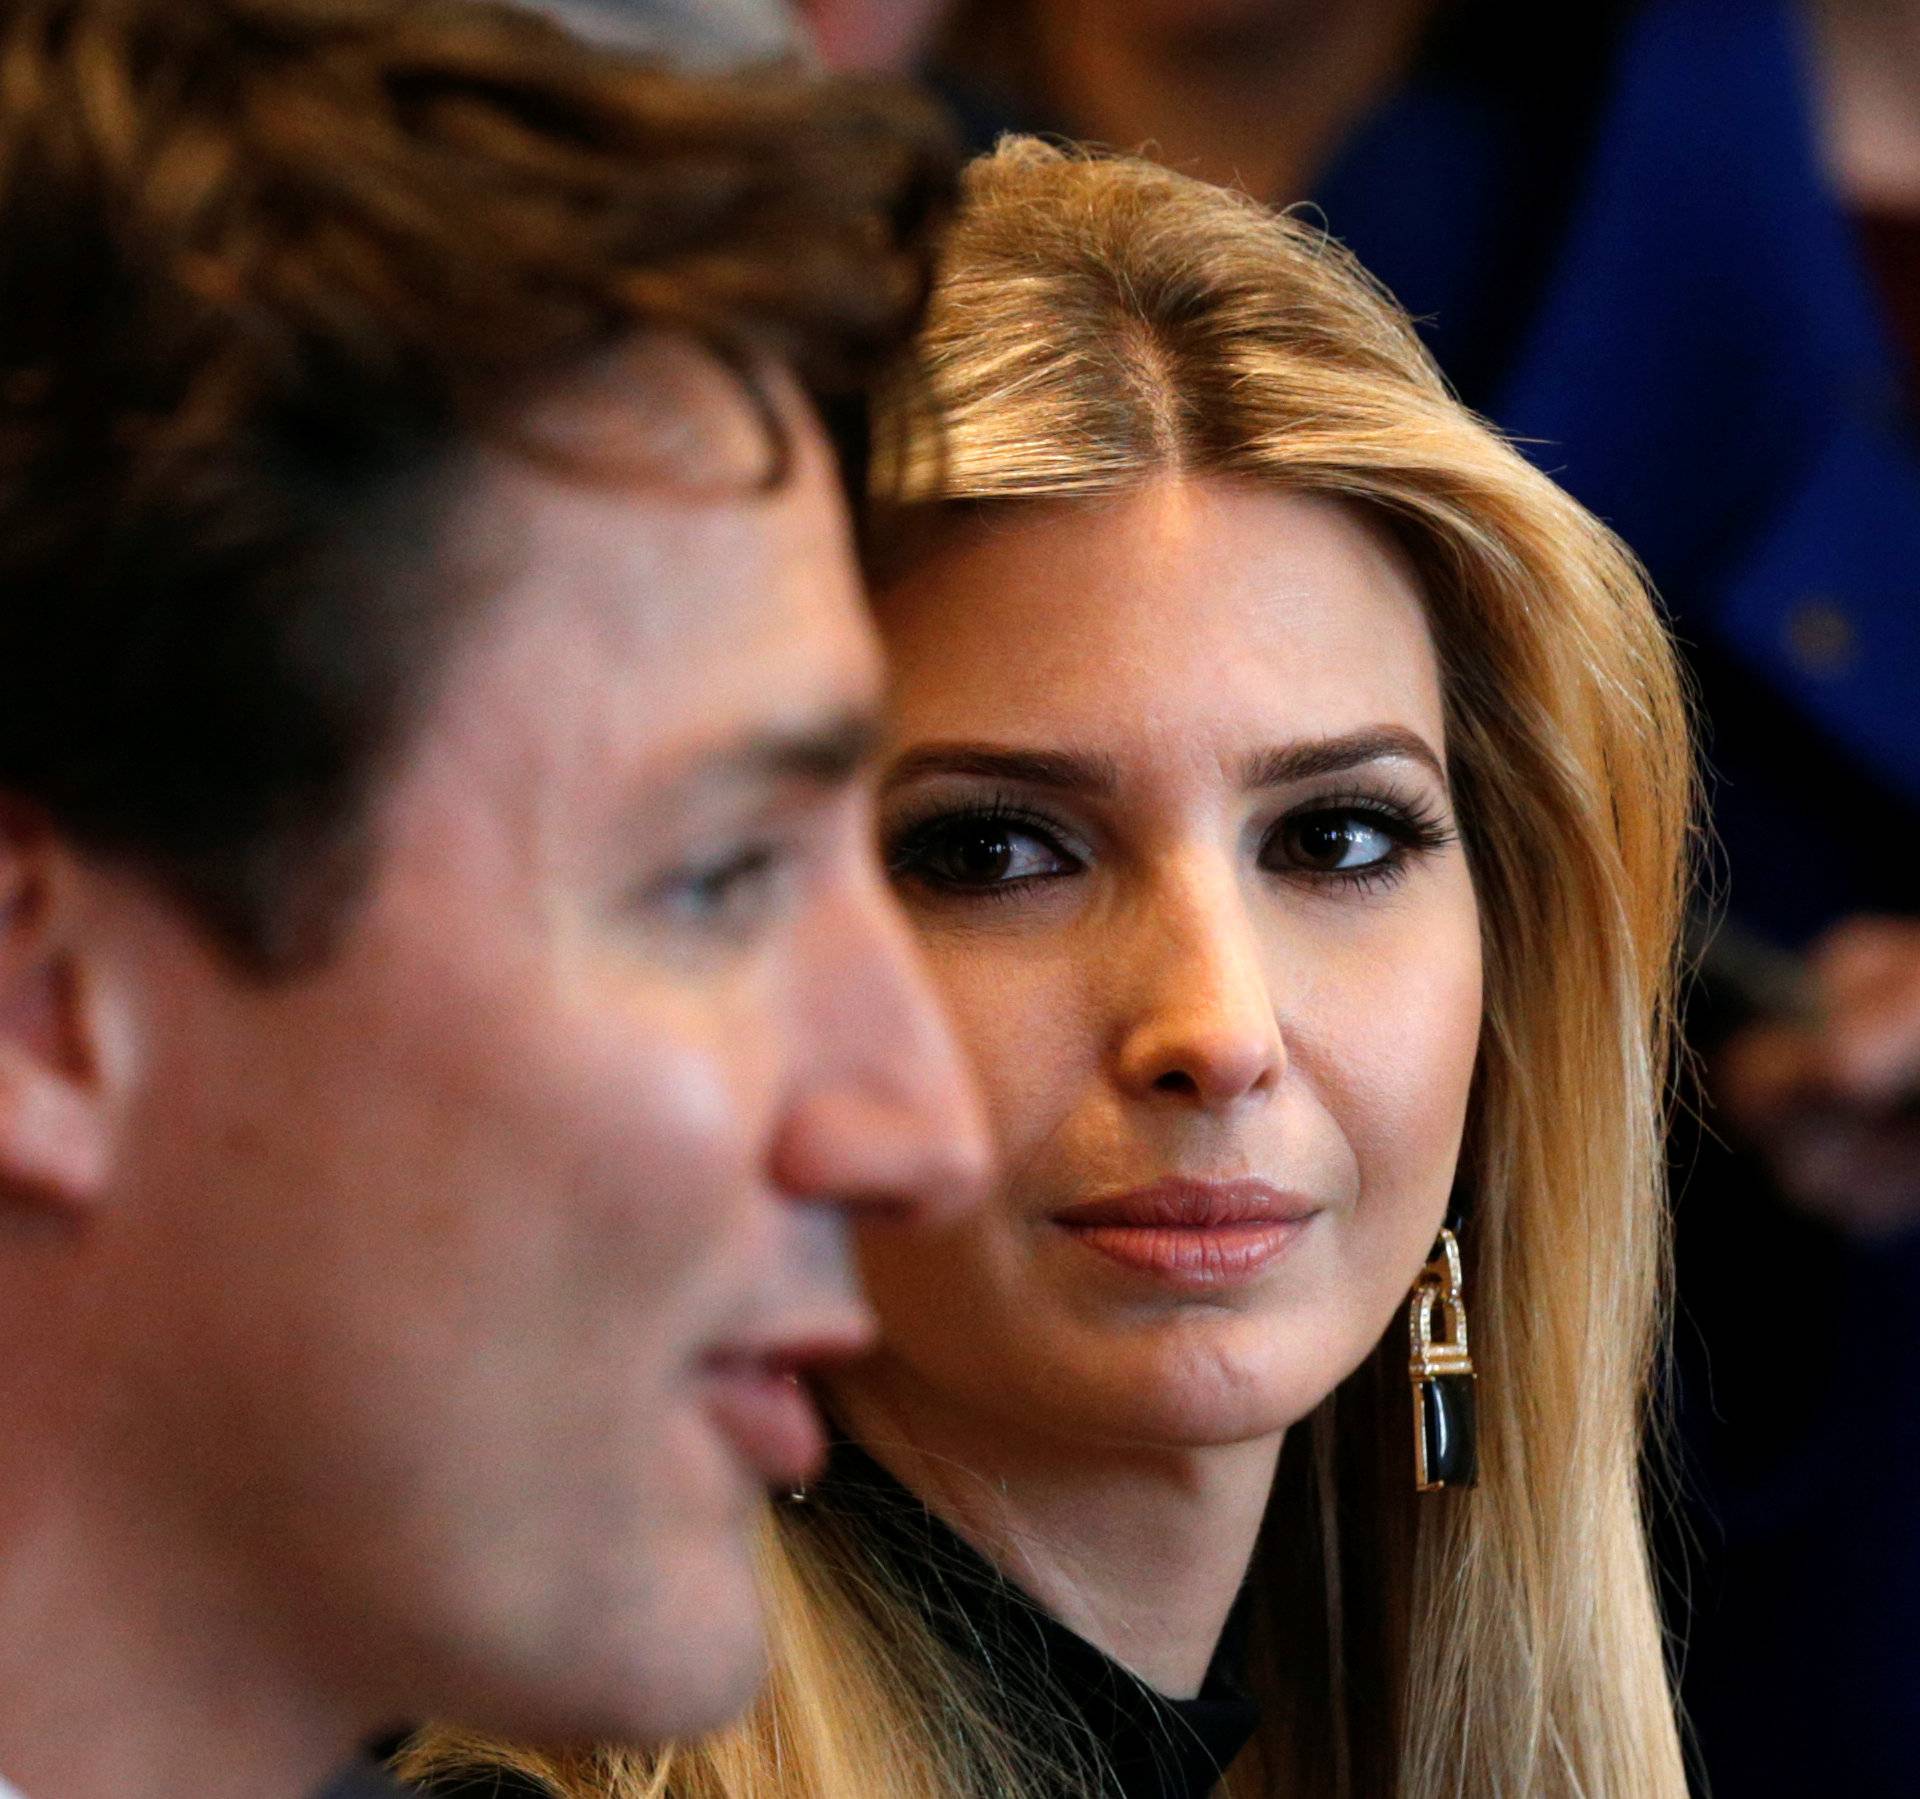 Ivanka Trump looks at Canadian Prime Minister Justin Trudeau during U.S. President Donald Trump's roundtable discussion on the advancement of women entrepreneurs and business leaders at the White House in Washington